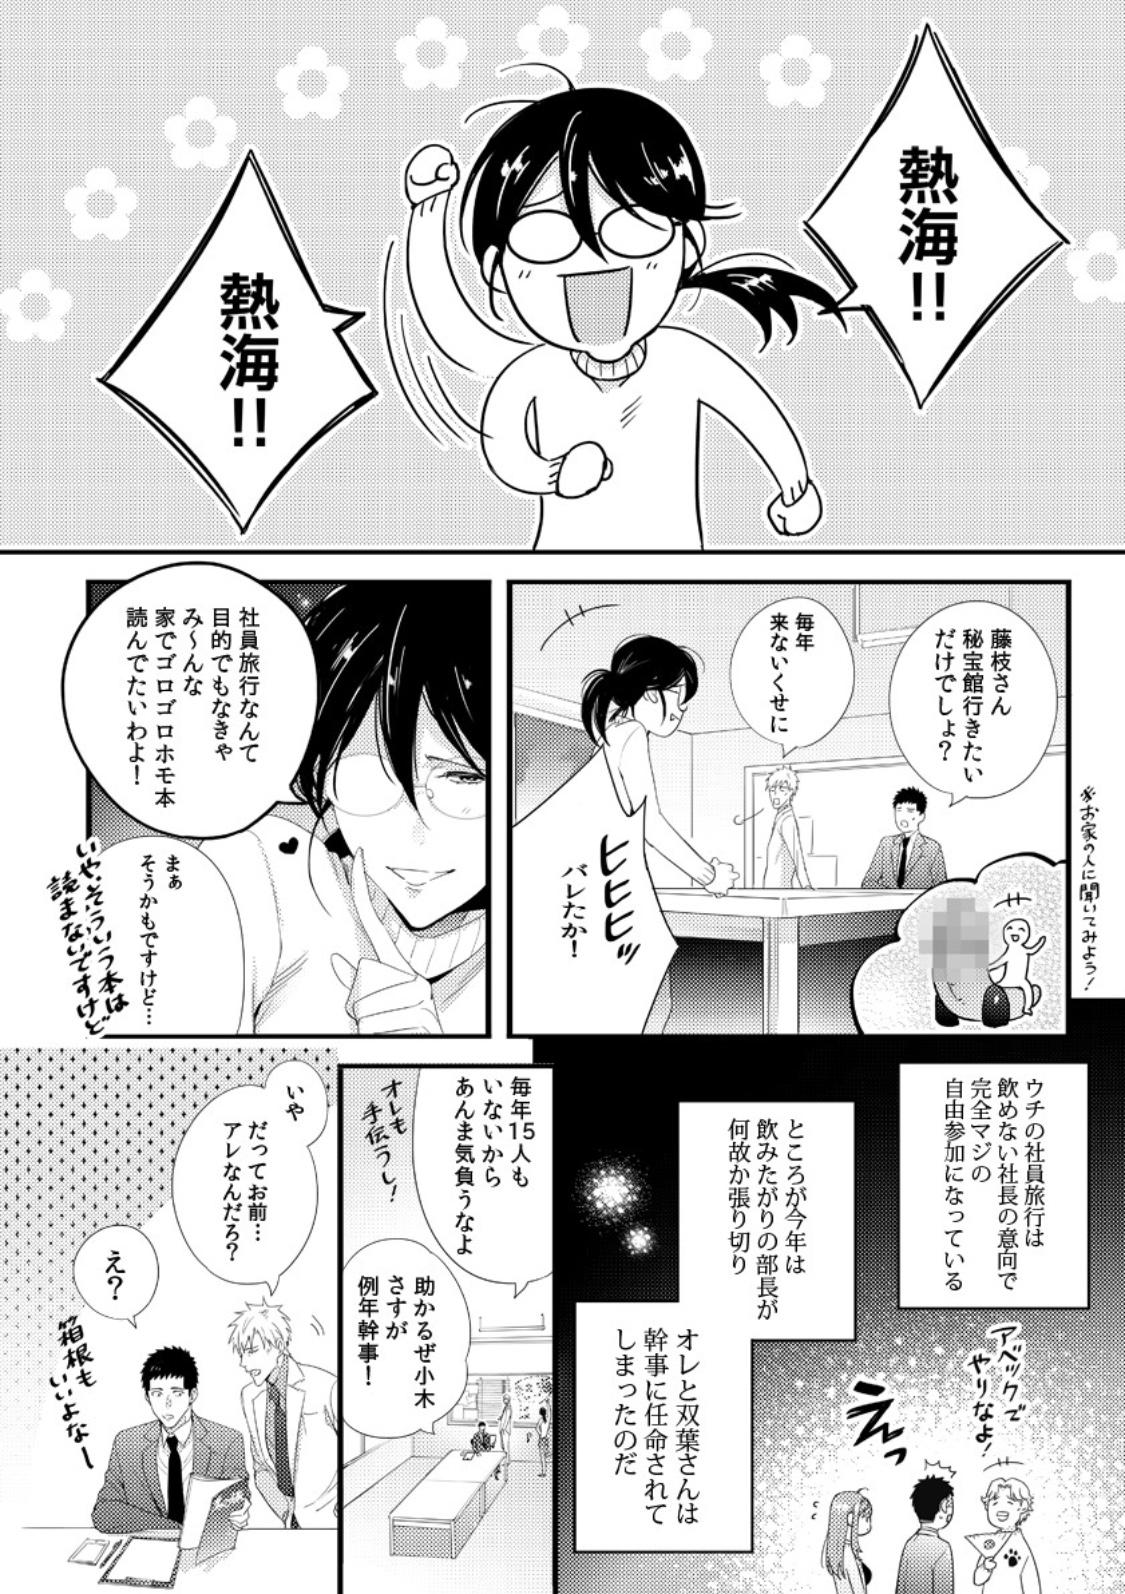 Please Let Me Hold You Futaba-San! Ch. 1-4 3